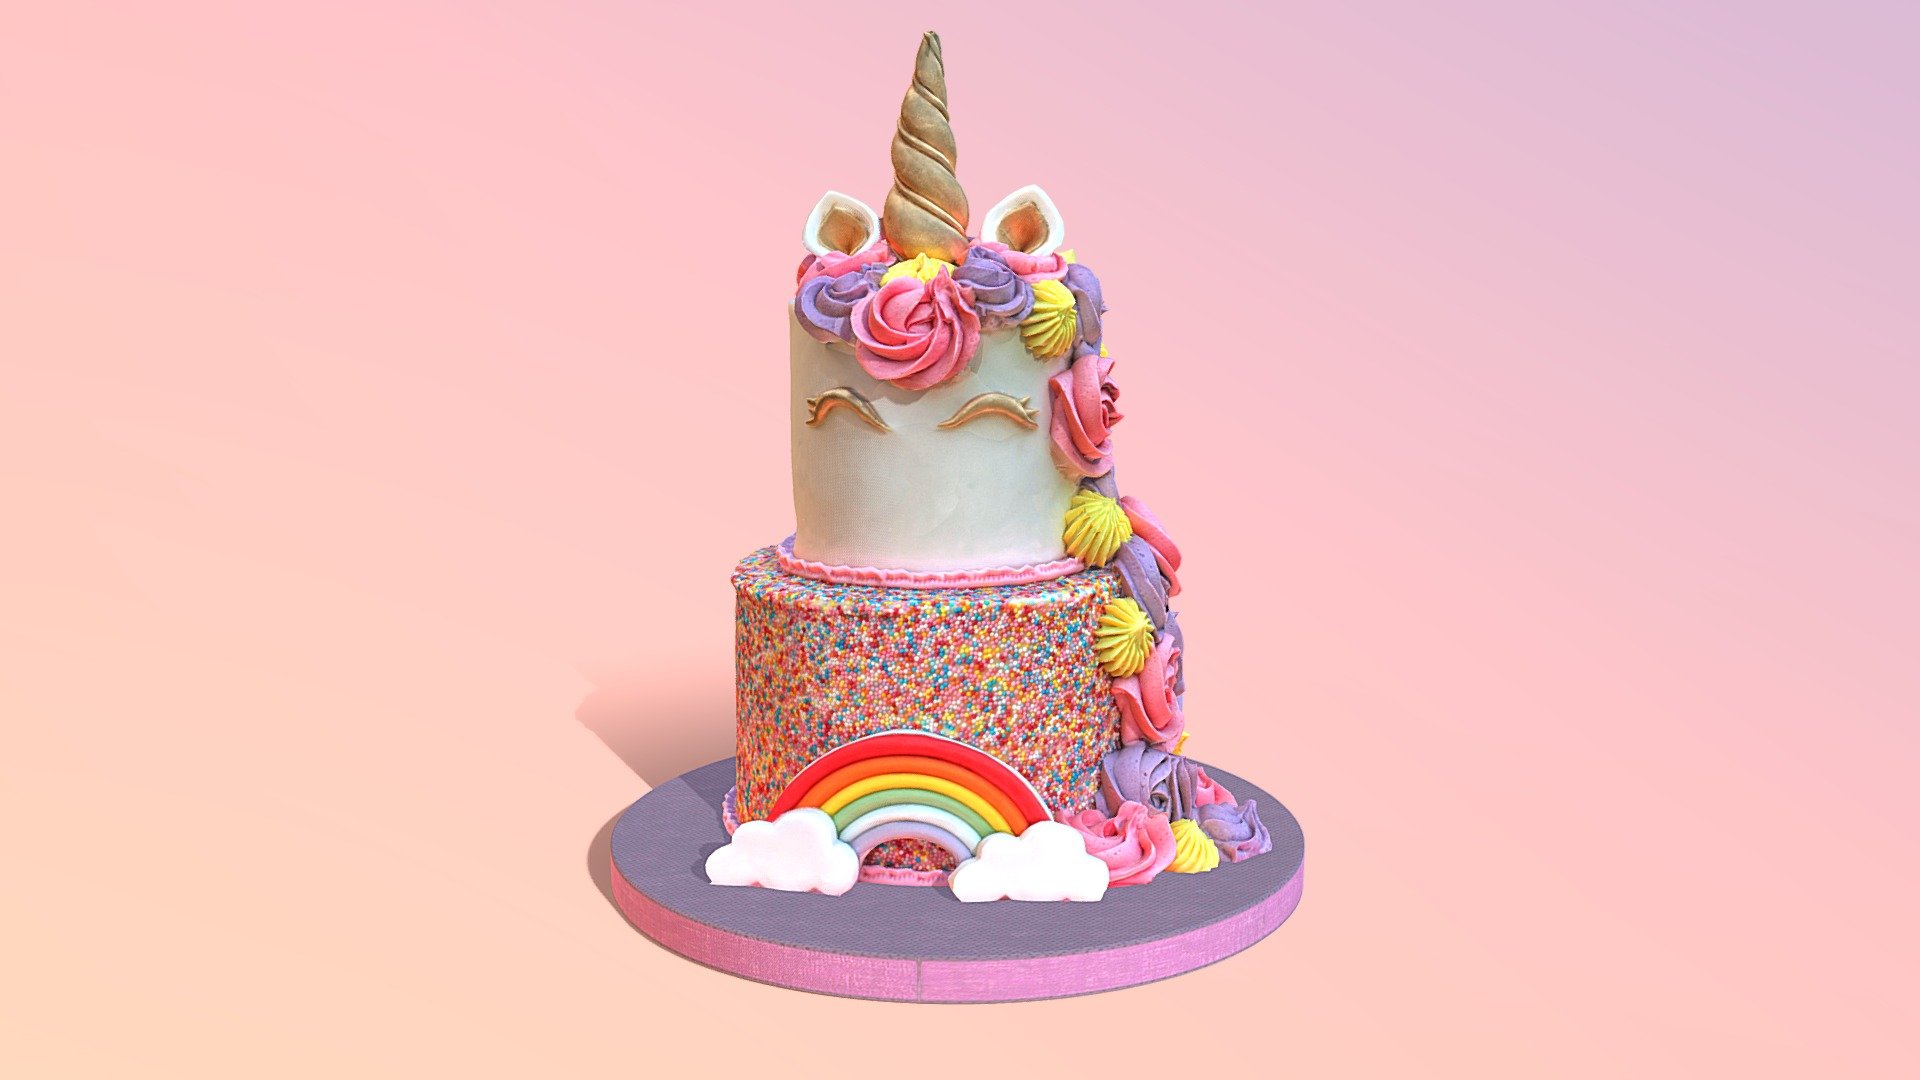 3D scan of a gorgeous Tiered Unicorn Cake which is made by CAKESBURG Online Premium Cake Shop in UK. You can also order real cake from this link: https://cakesburg.co.uk/products/unicorn-cake-2?_pos=1&amp;_sid=86743a5fb&amp;_ss=r

Textures 4096*4096px PBR photoscan-based materials Base Color, Normal Map, Roughness) - Tiered Unicorn Cake - Buy Royalty Free 3D model by Cakesburg Premium 3D Cake Shop (@Viscom_Cakesburg) 3d model